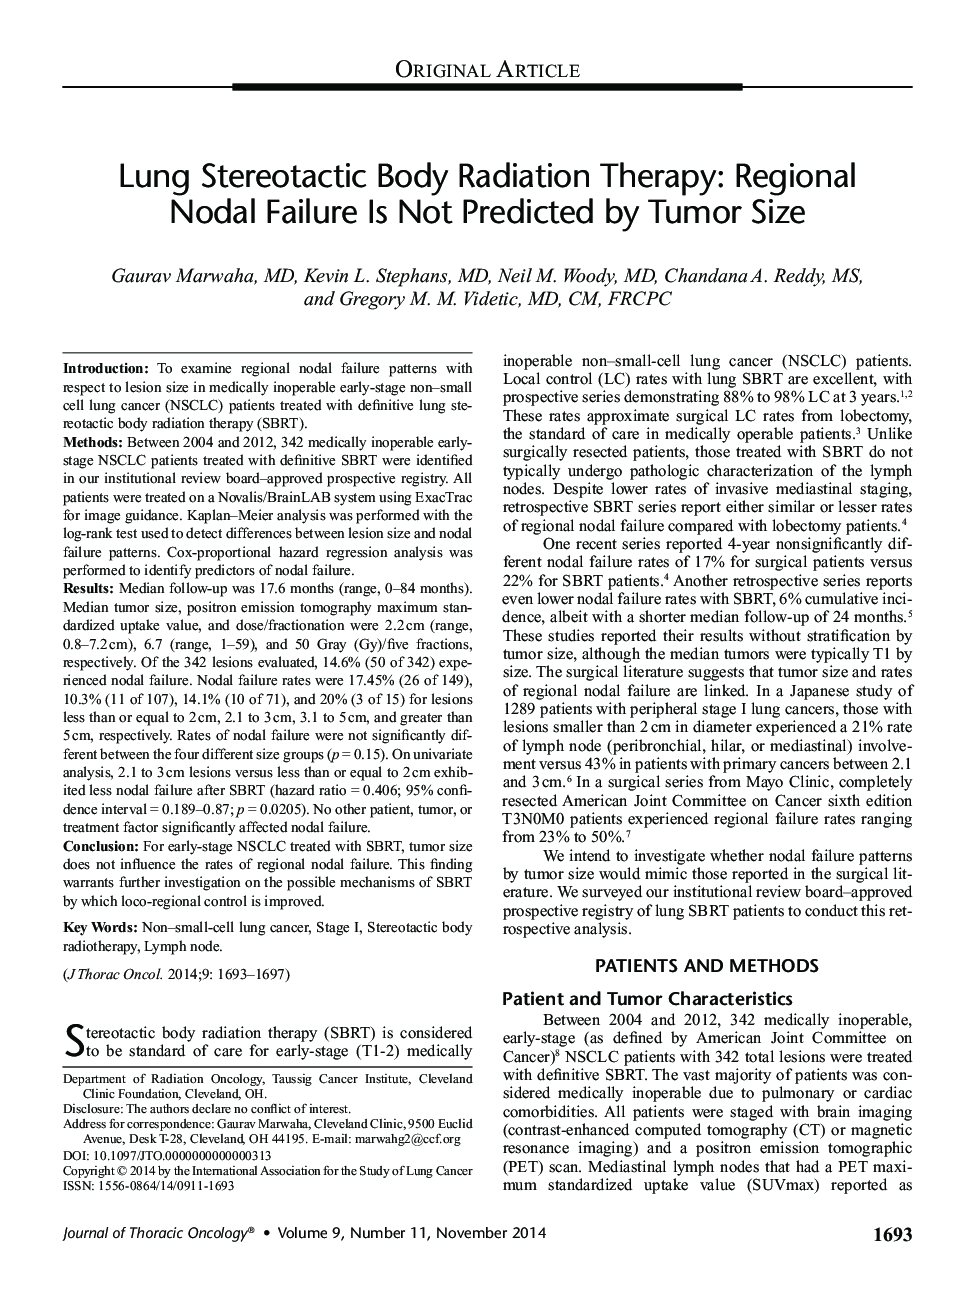 Lung Stereotactic Body Radiation Therapy: Regional Nodal Failure Is Not Predicted by Tumor Size 